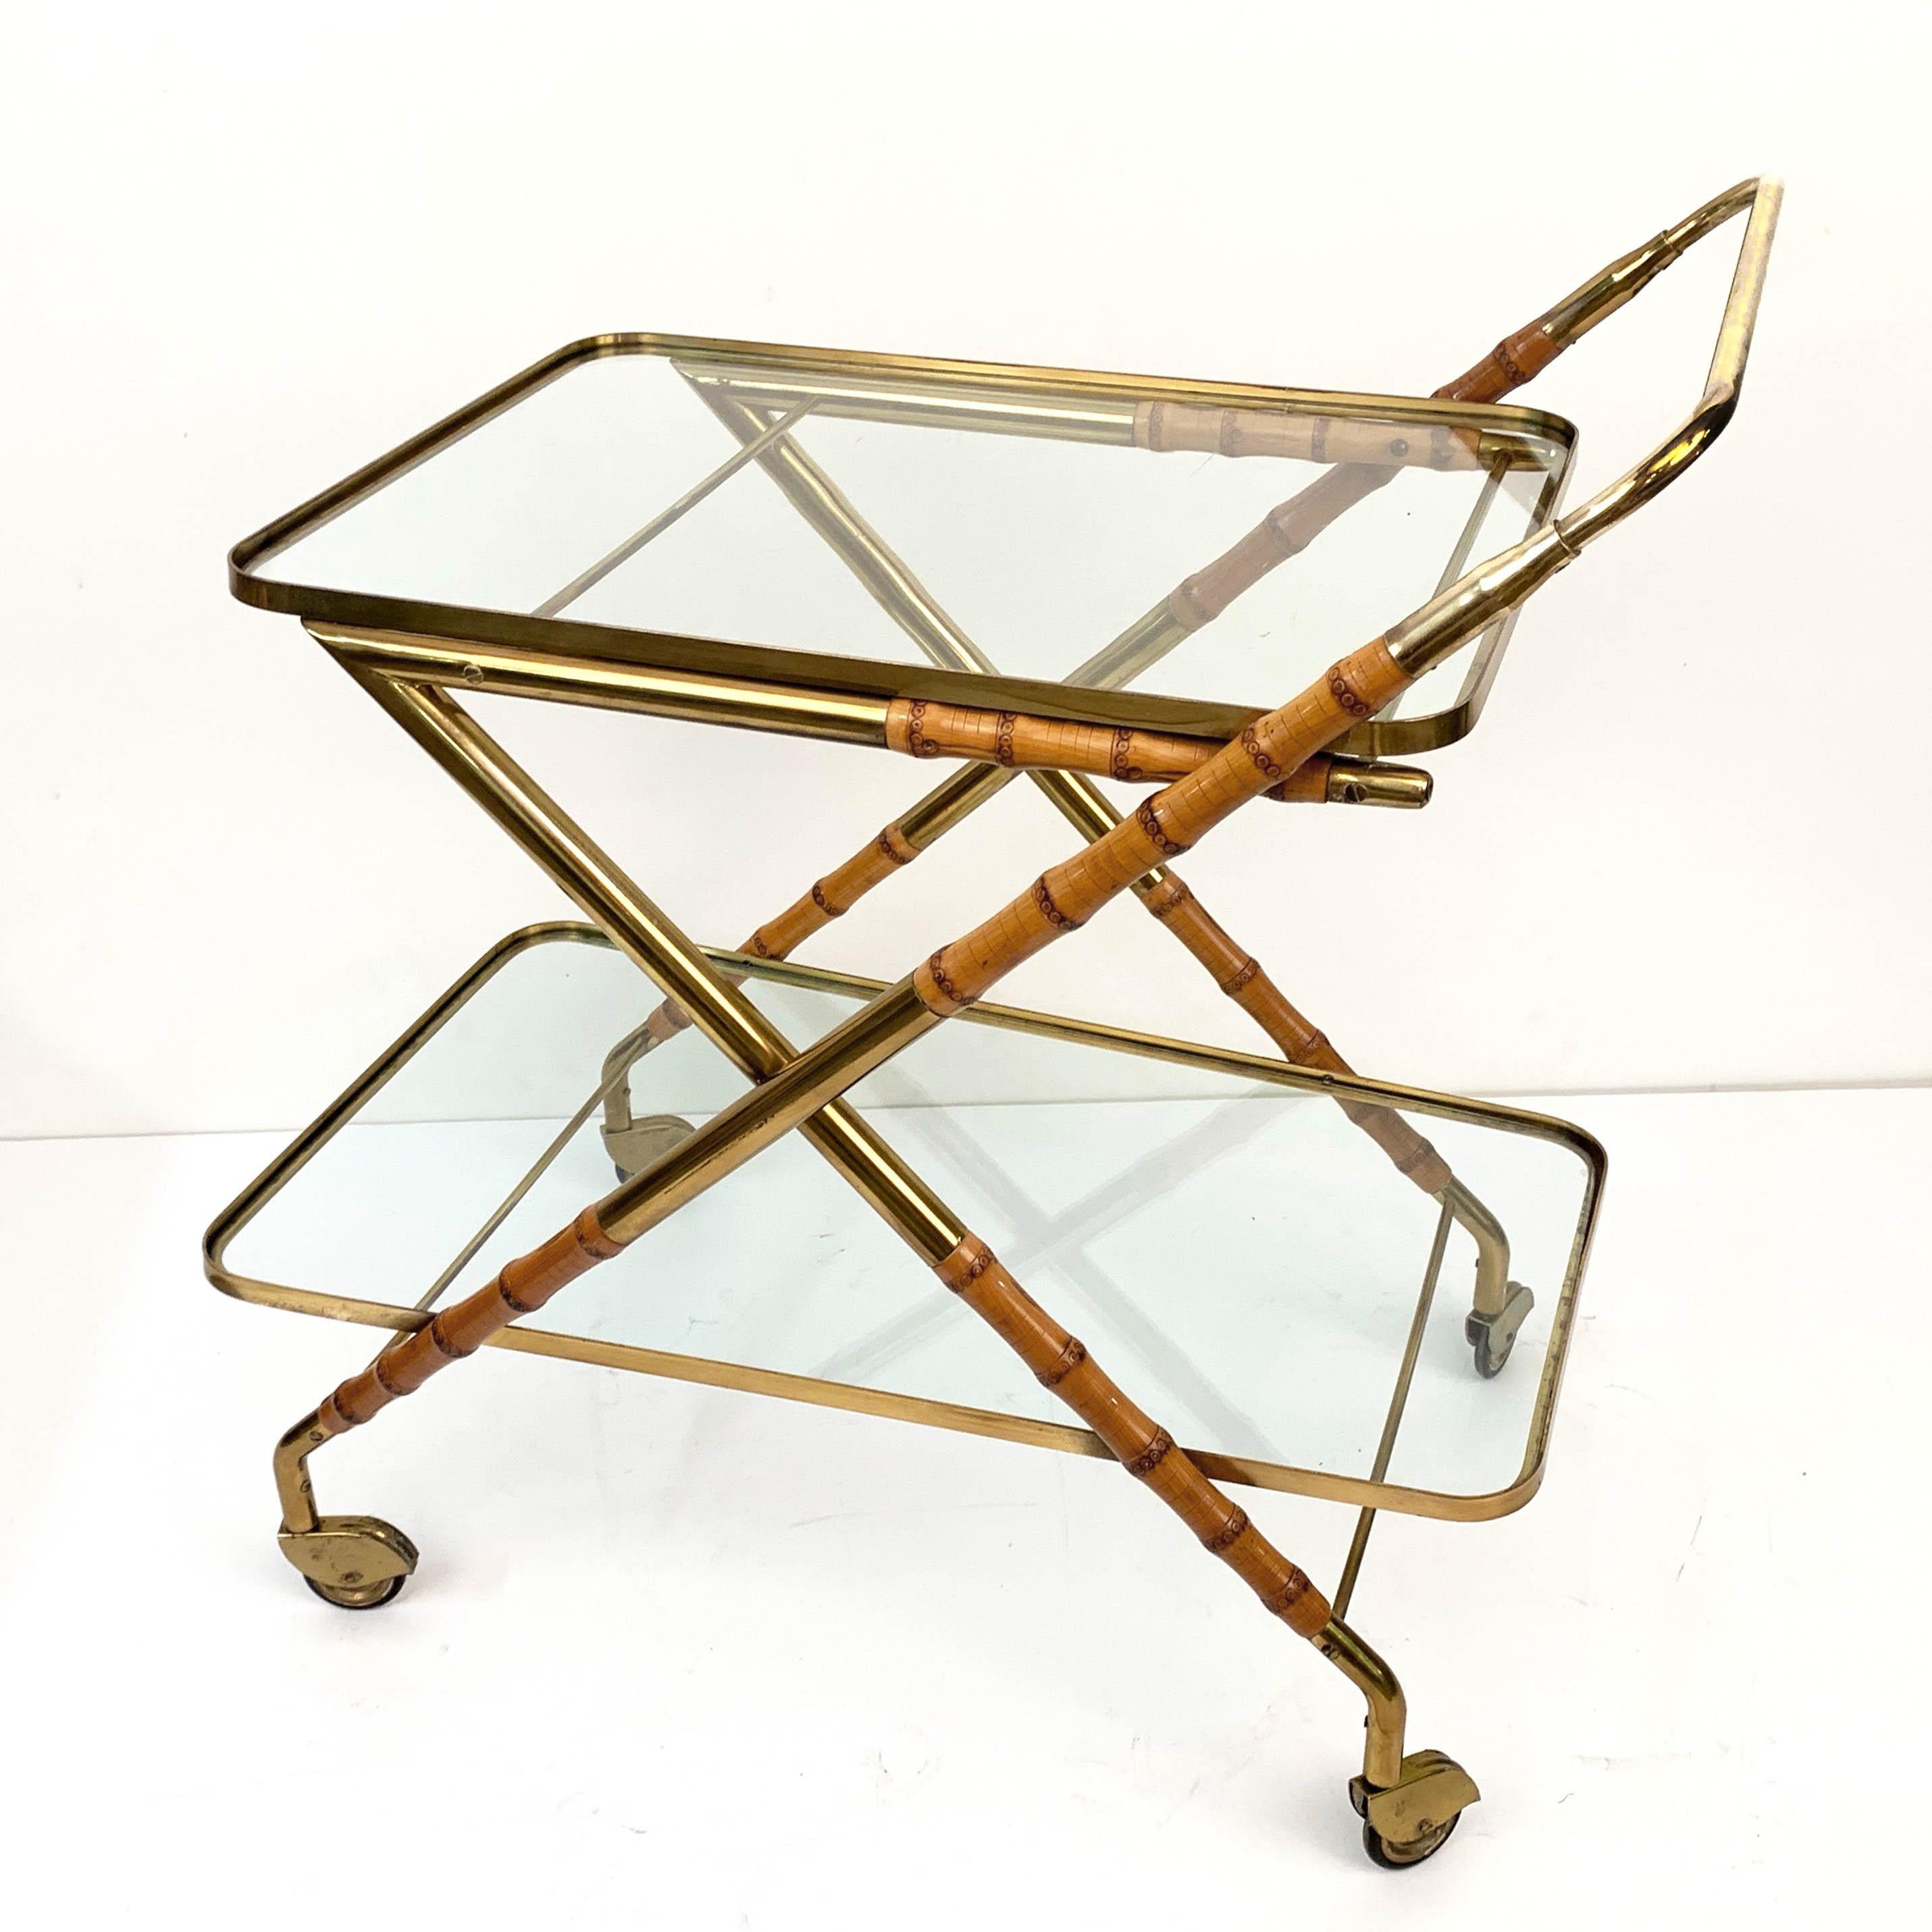 Amazing midcentury bamboo and brass bar cart with glass shelves. This rare piece was designed in Italy during 1950s and it is attributed to Cesare Lacca.

This item is unique for the mix of materials in its structure, that is brass and bamboo. In